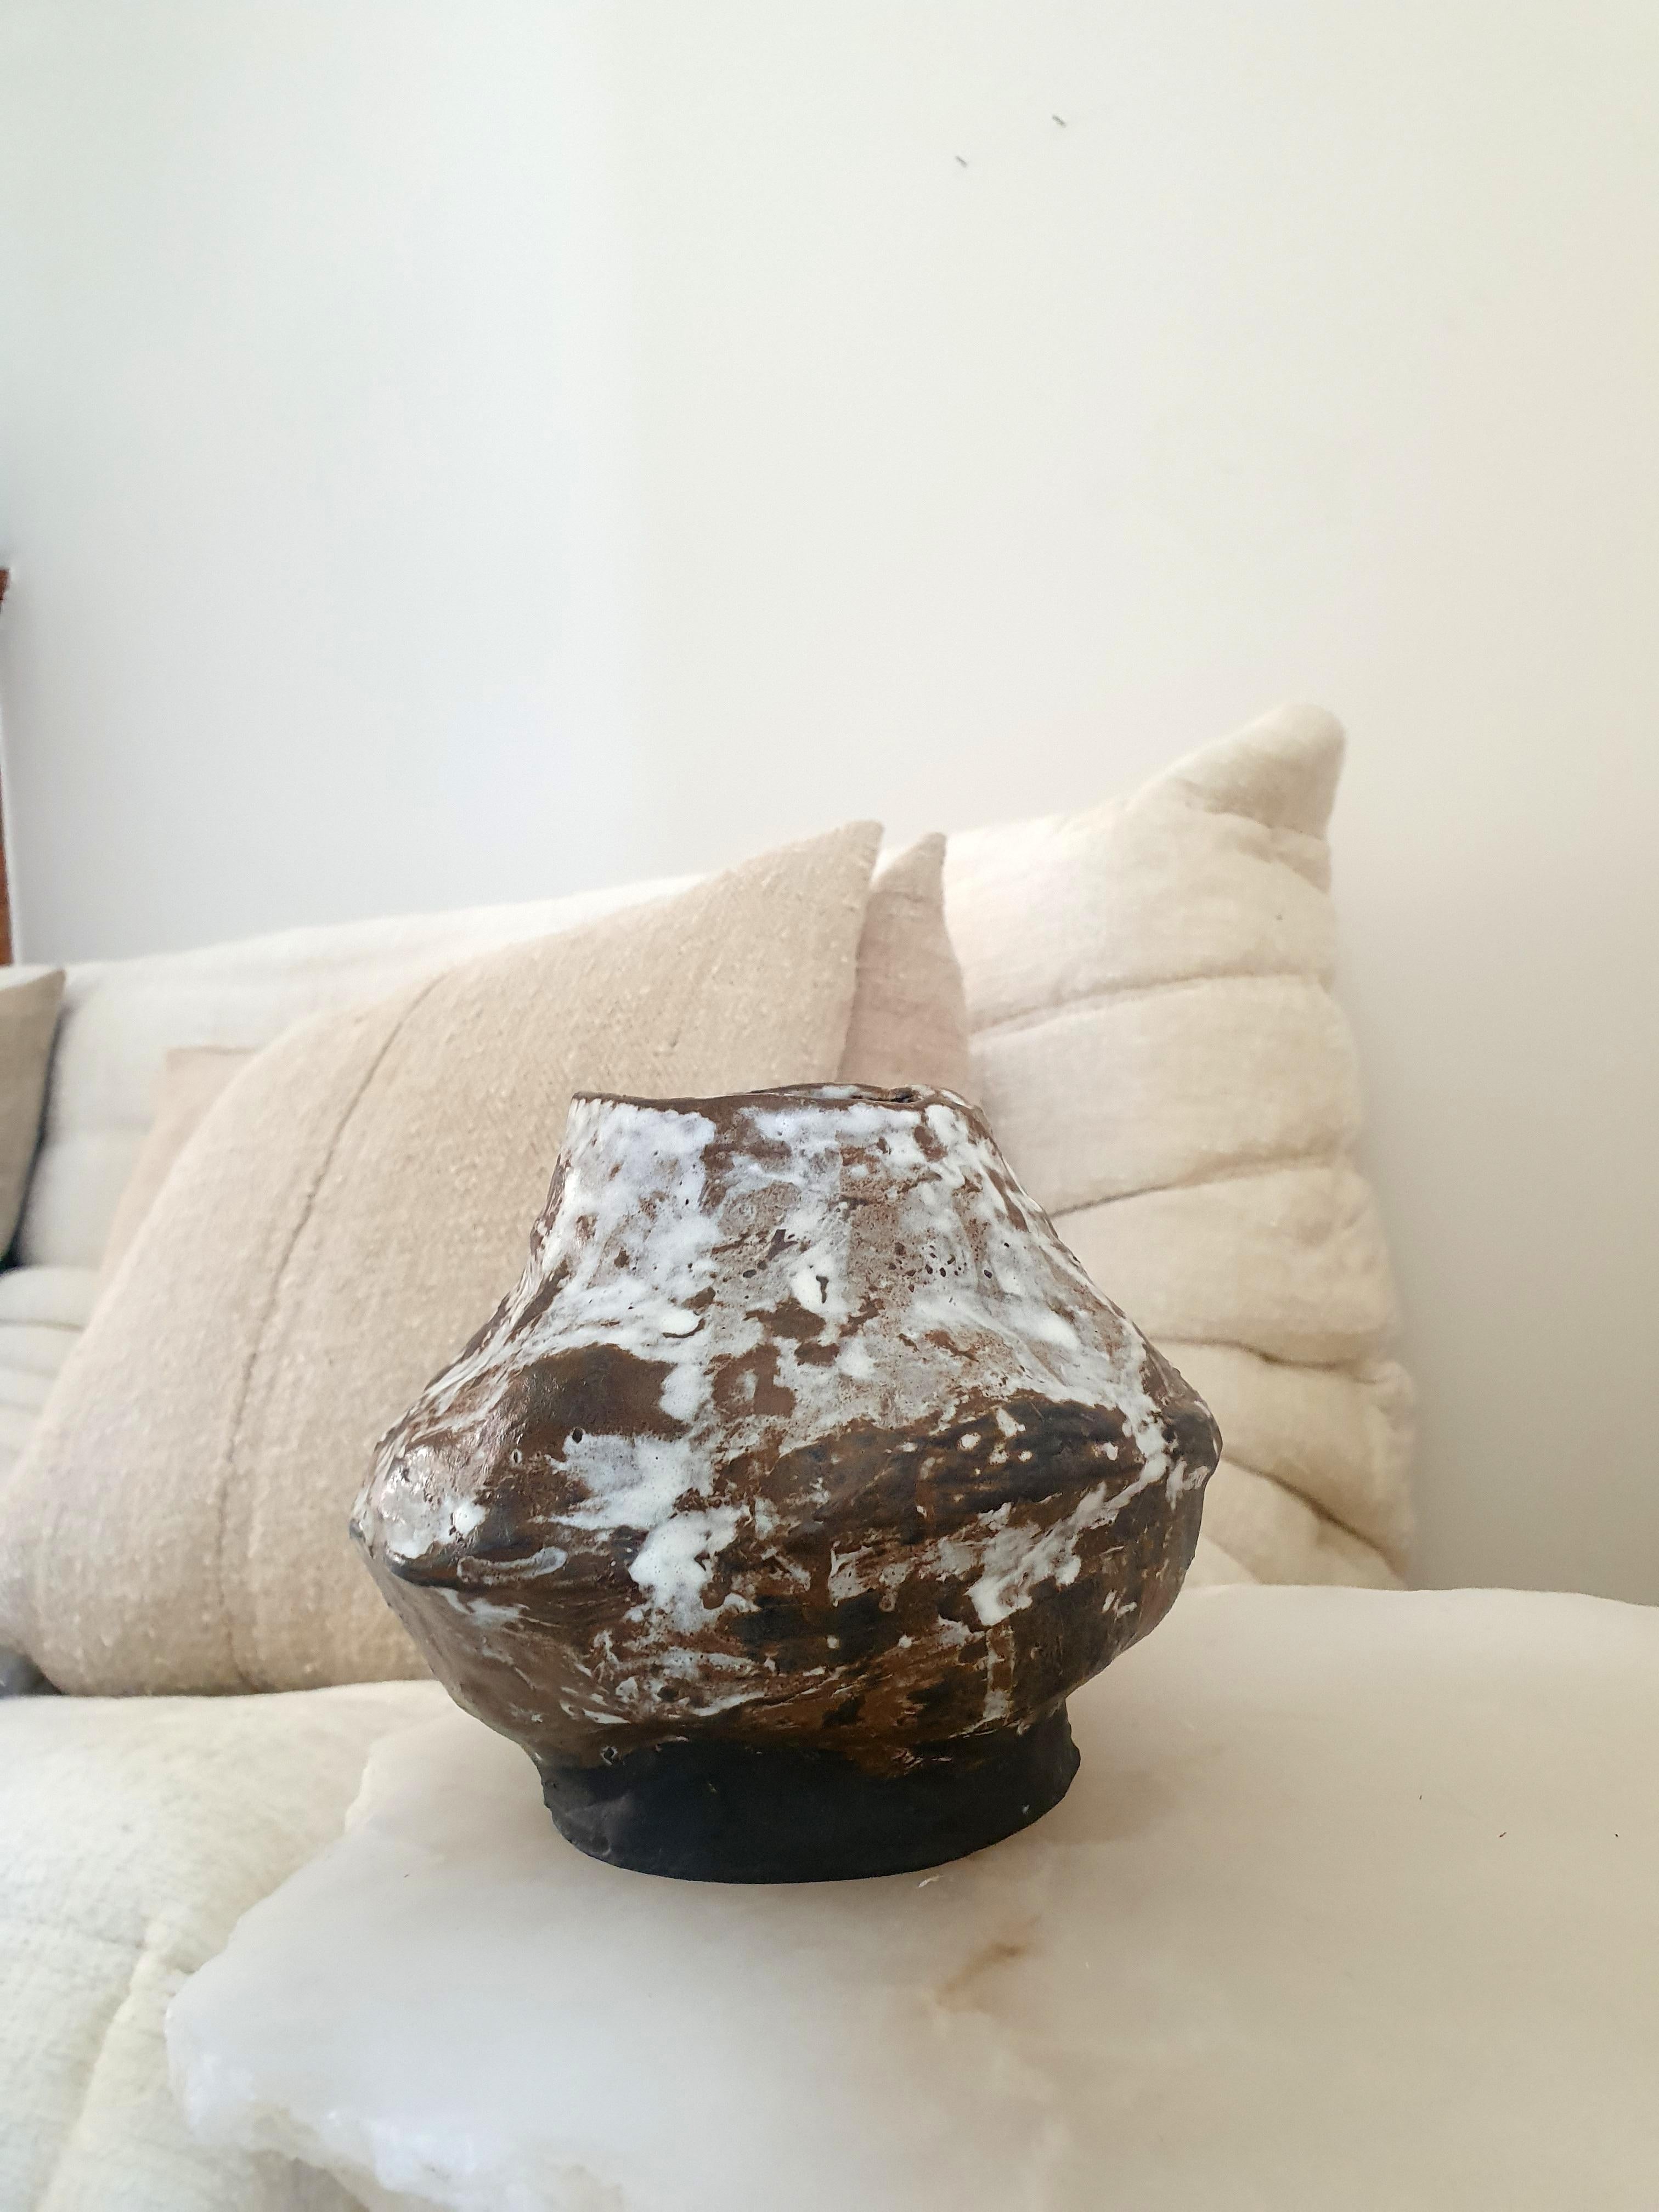 Brown Morandi vase by Adèle Clèves
Dimensions: D 15 x W 16 x H 13 cm
Materials: Ceramic.

Adèle Clèves was born in Paris in 1989, after studying in the Beaux Arts and Archeology at the Sorbonne, she specialized in ceramic creations.
Inspired by